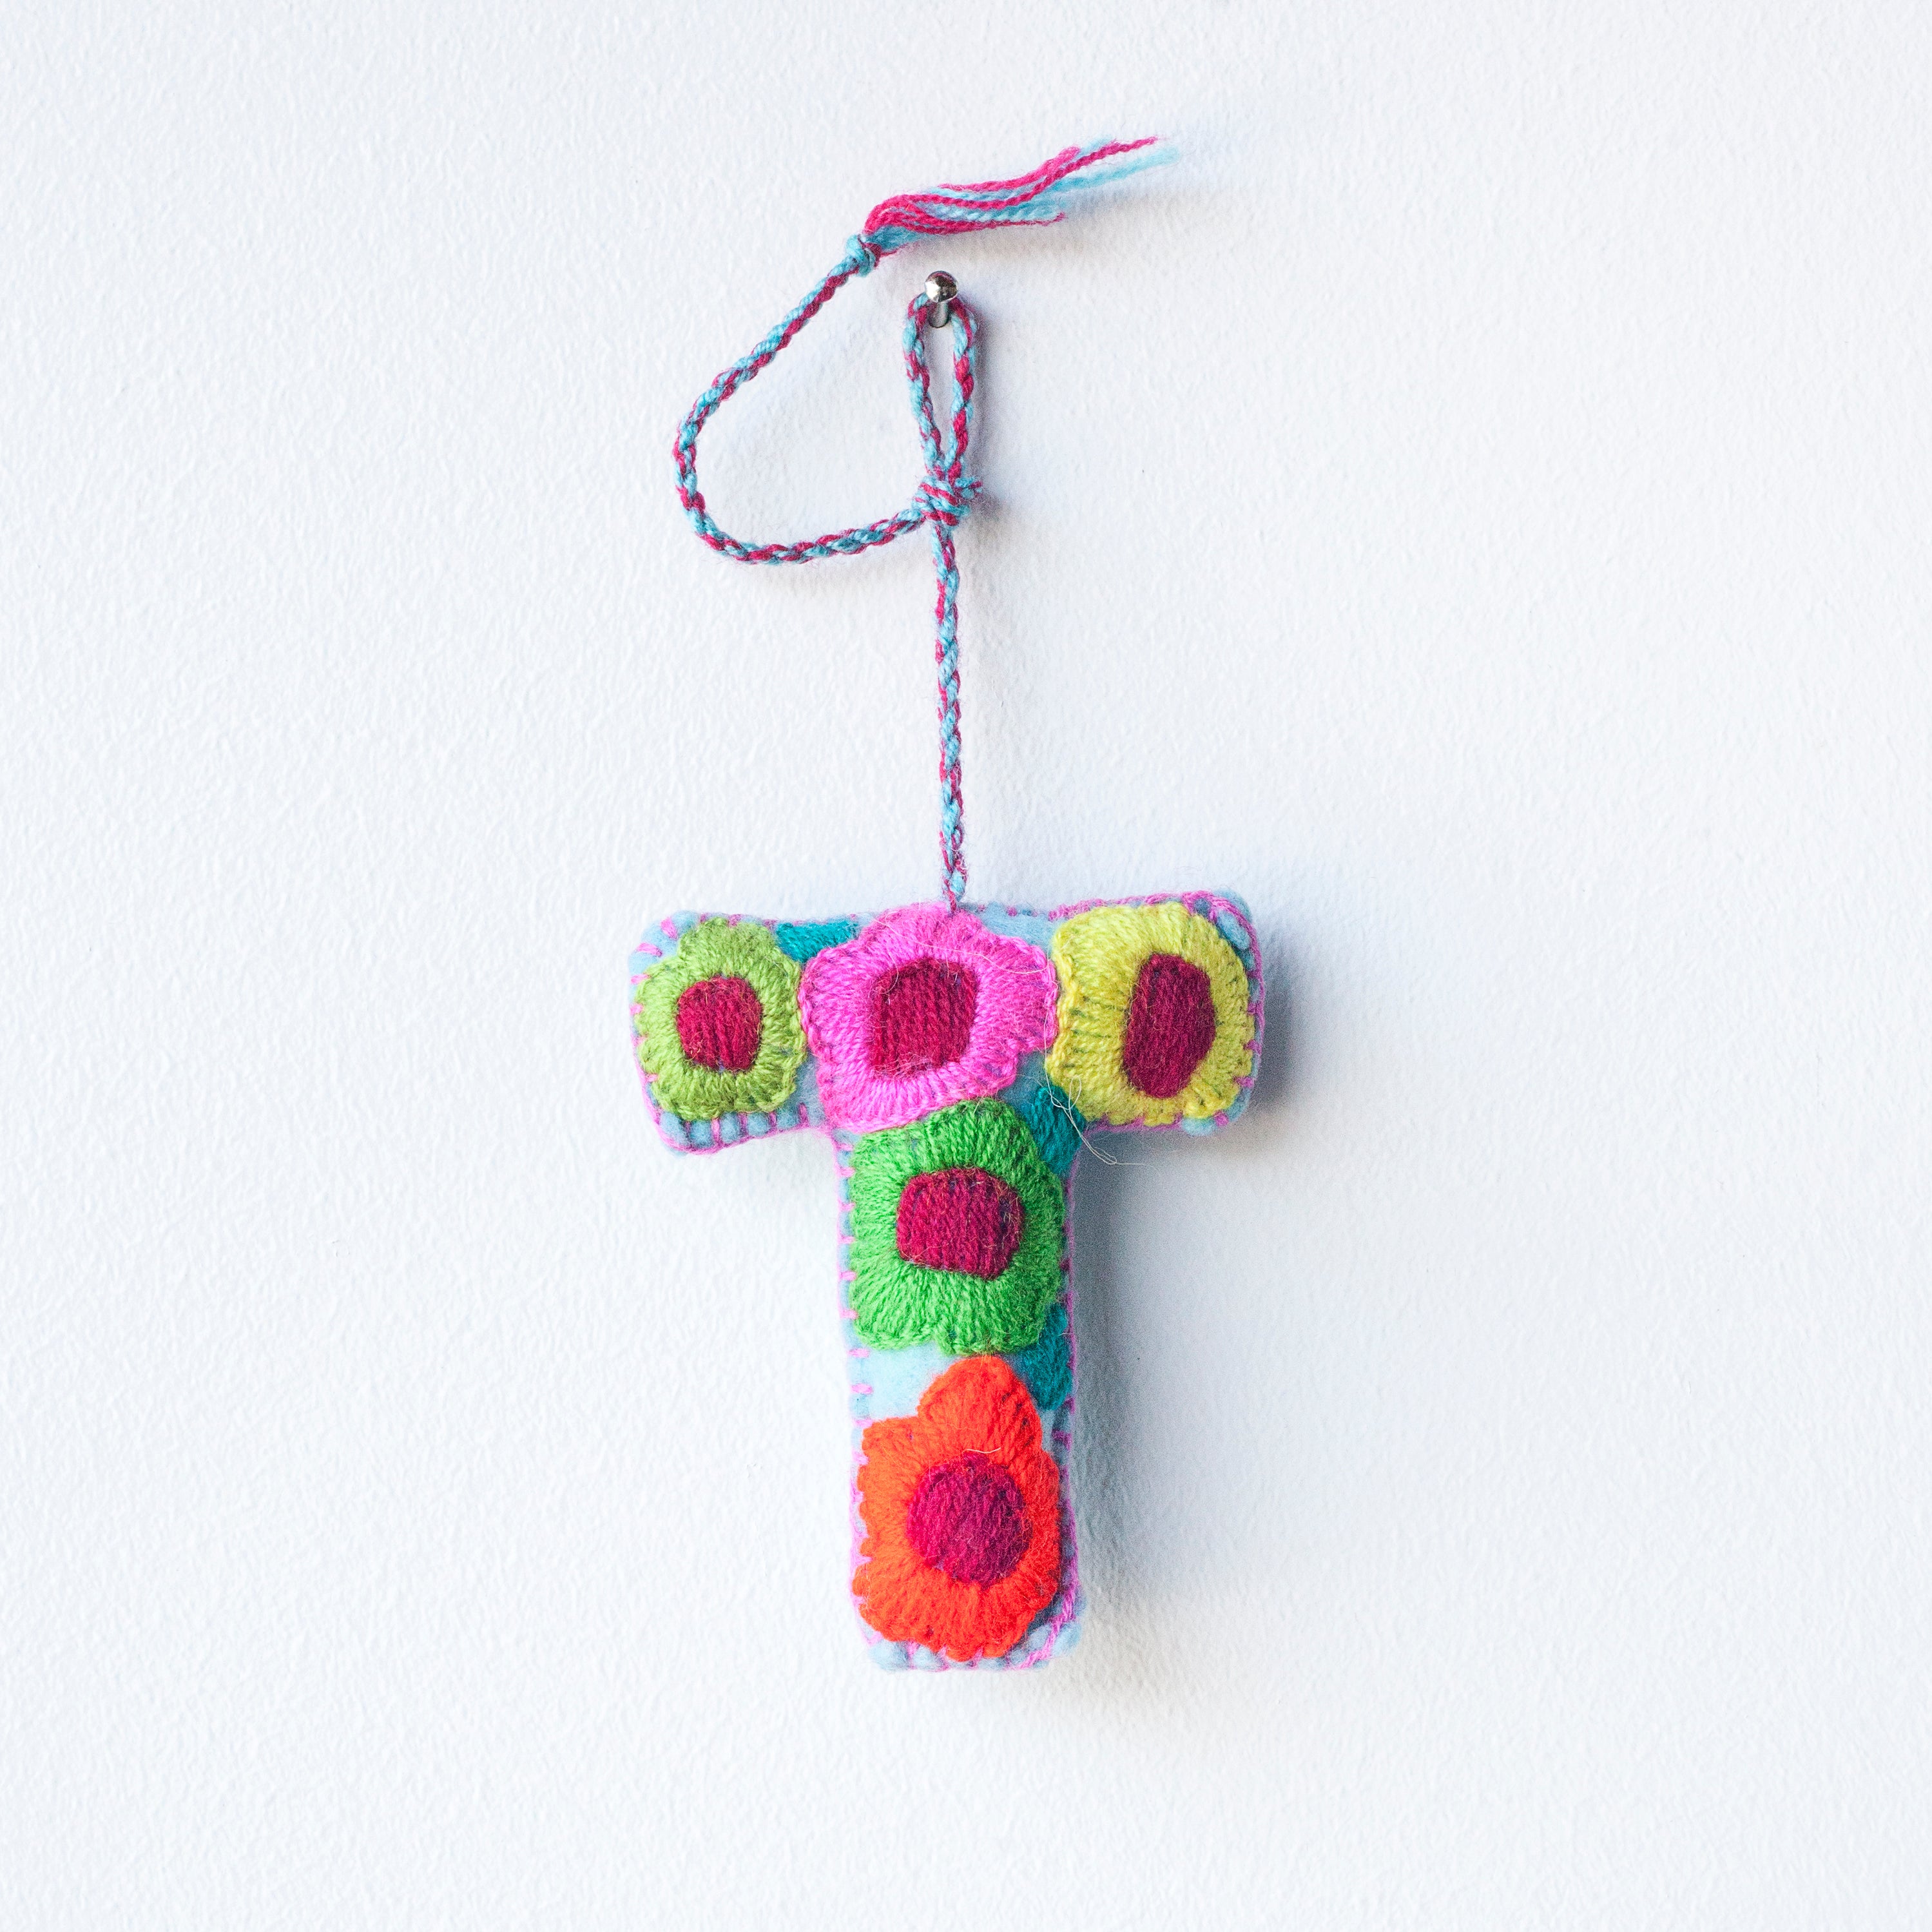 Colorful felt letter "T" with multicolor floral hand-embroidery hanging by a colorful string.